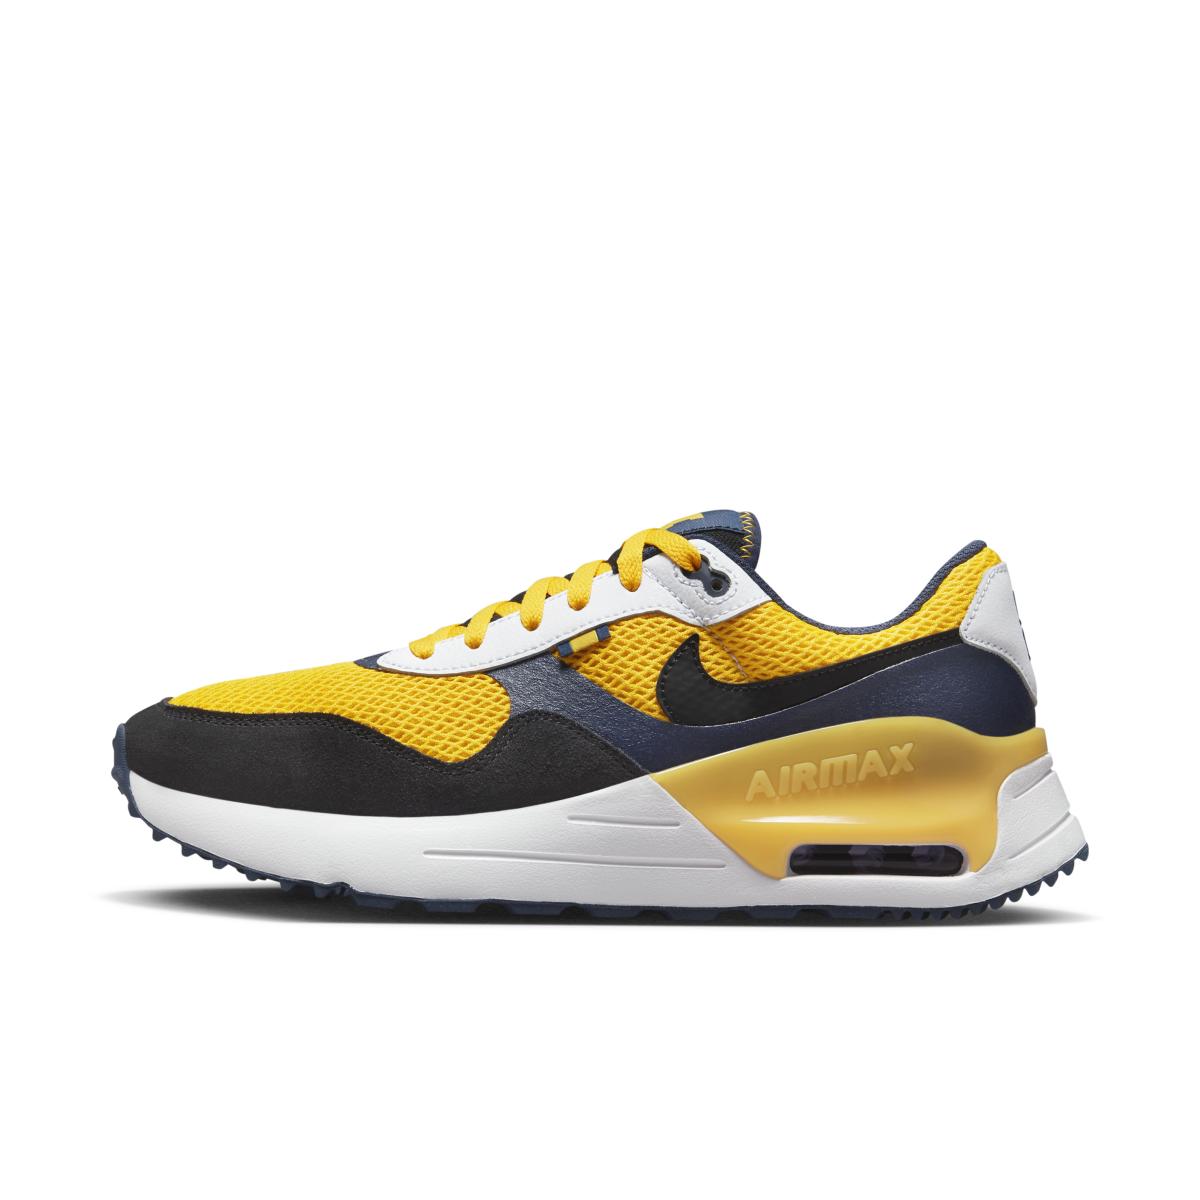 Michigan Wolverines Nike Air Max Collection, how to buy your Wolverines ...